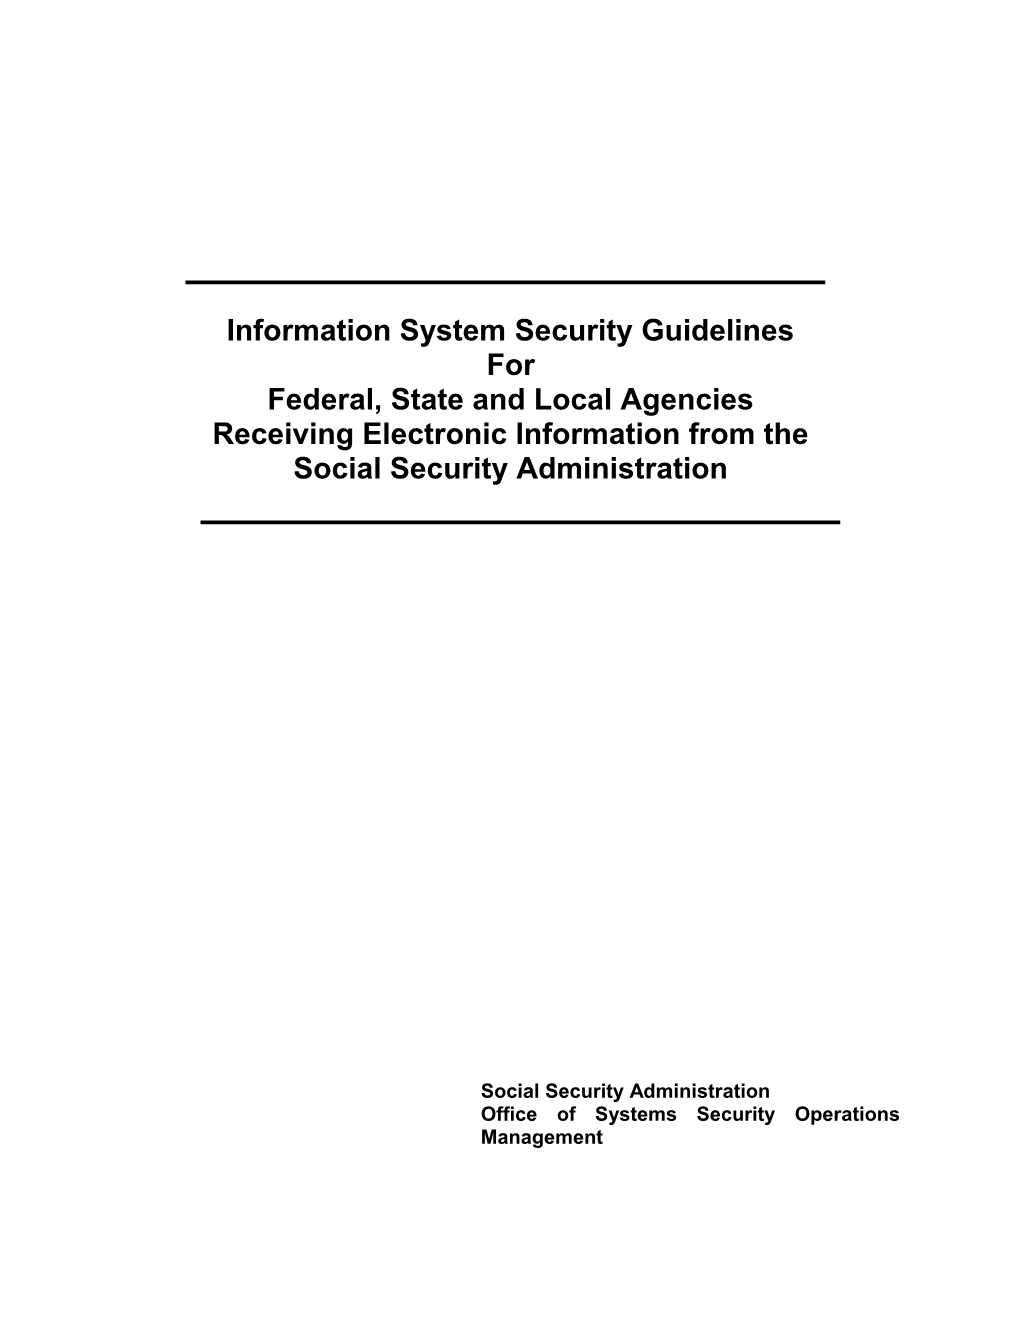 Social Security Information Security Standards for Federal, State and Local Agencies